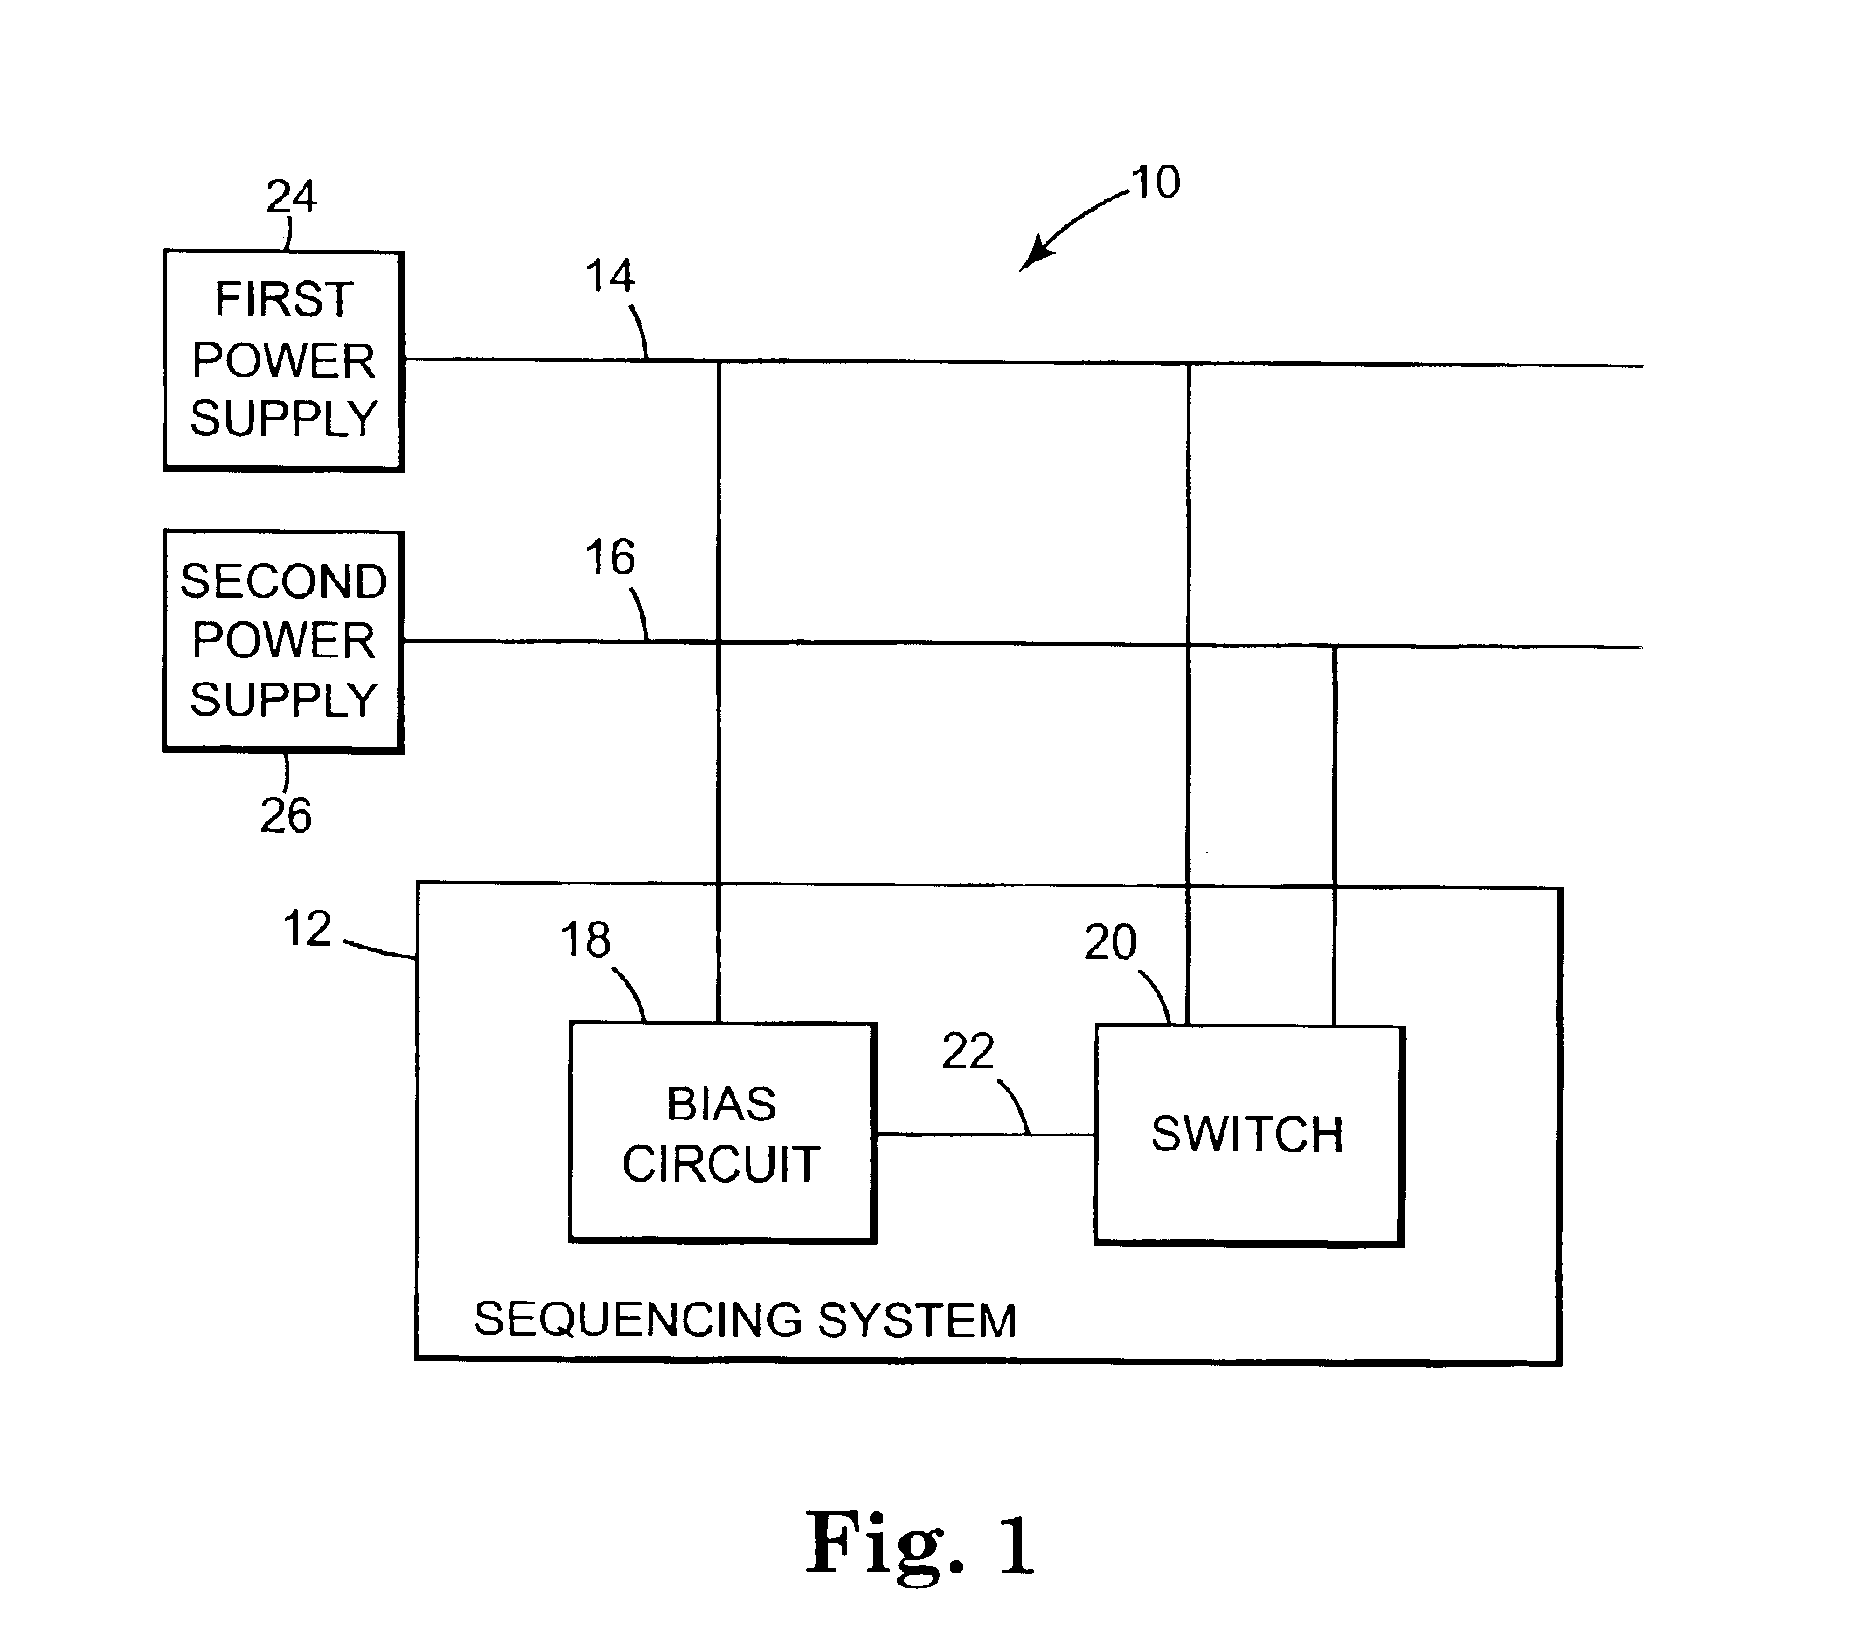 System for sequencing a first node voltage and a second node voltage